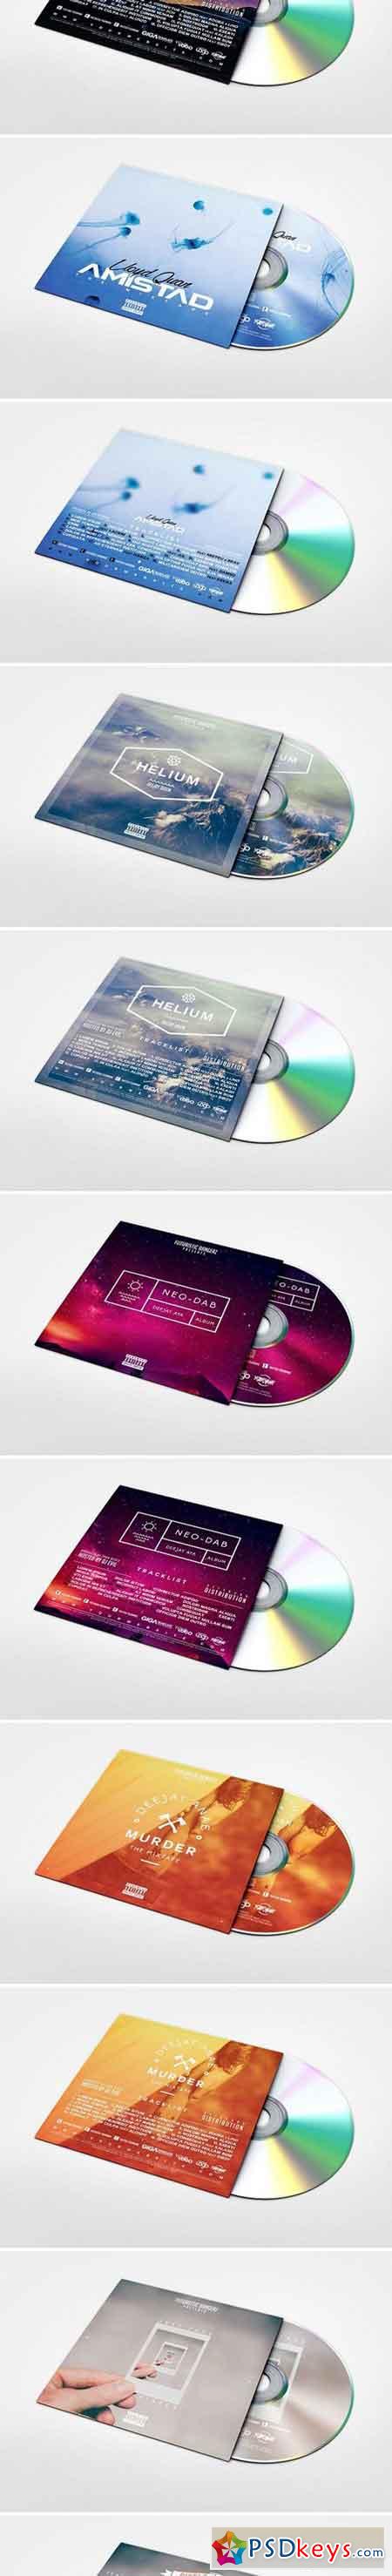 35 CD COVER TEMPLATES 1607233